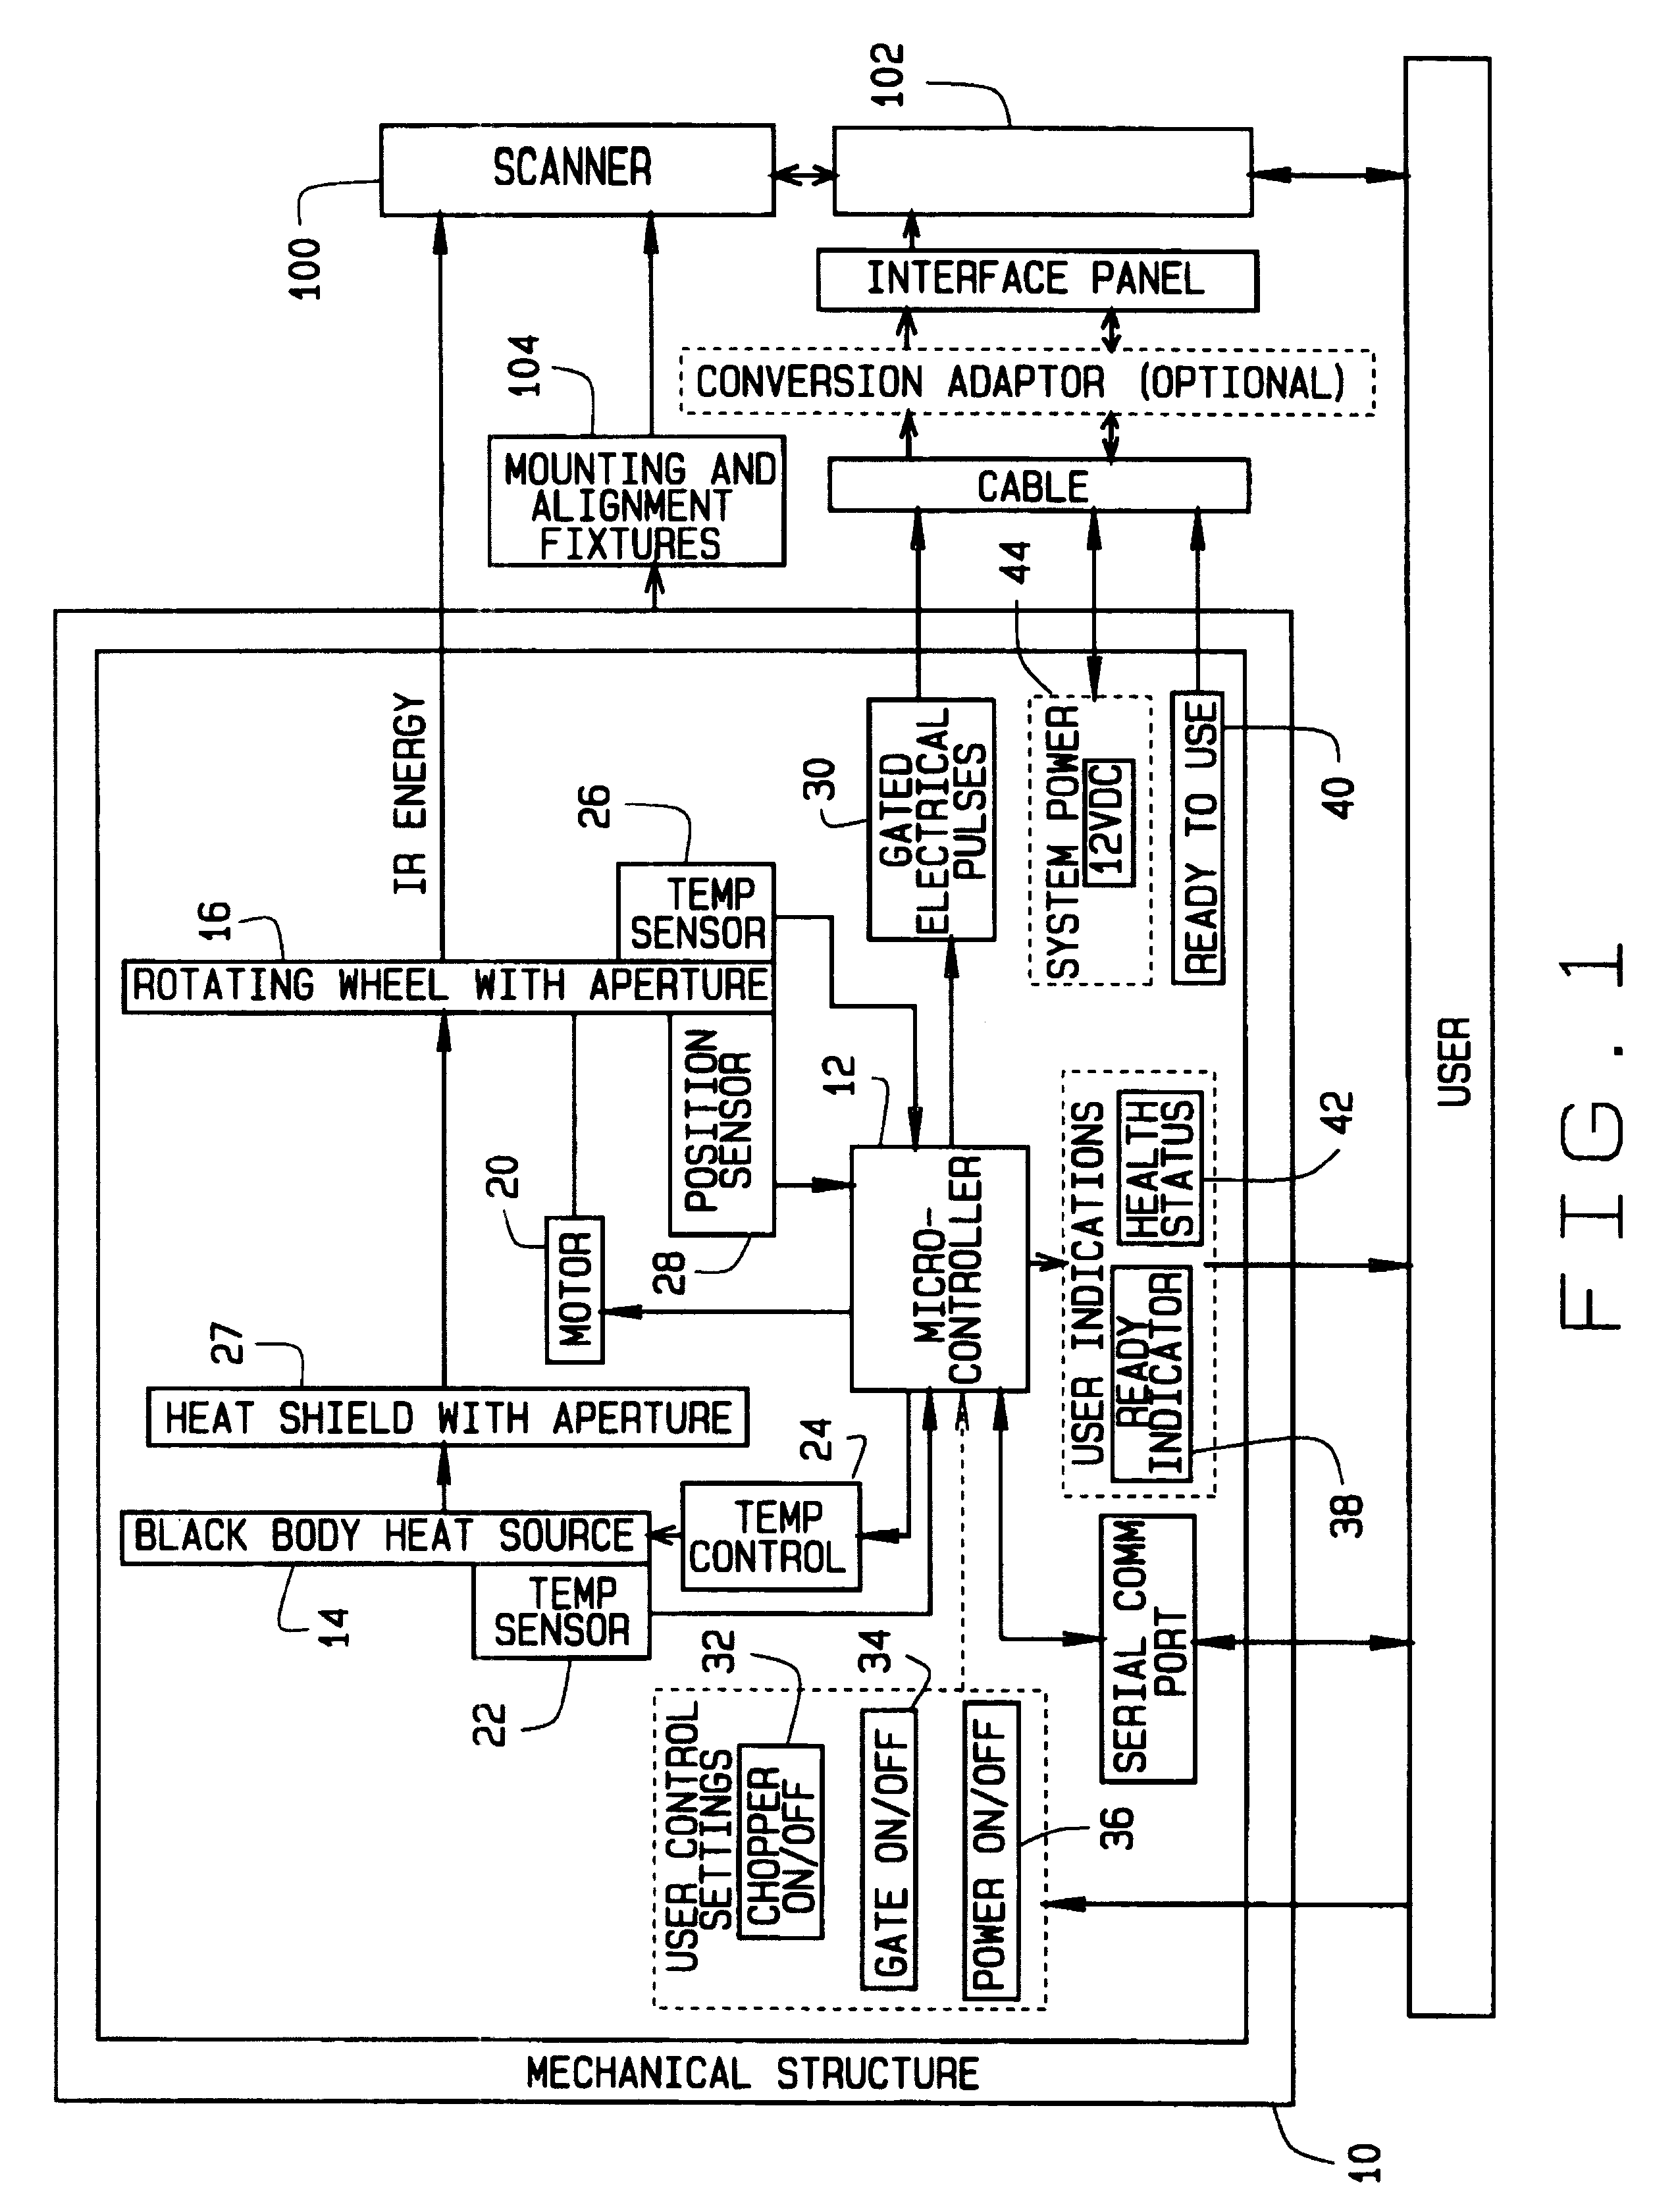 Method and apparatus for time-phased constant IR energy delta source